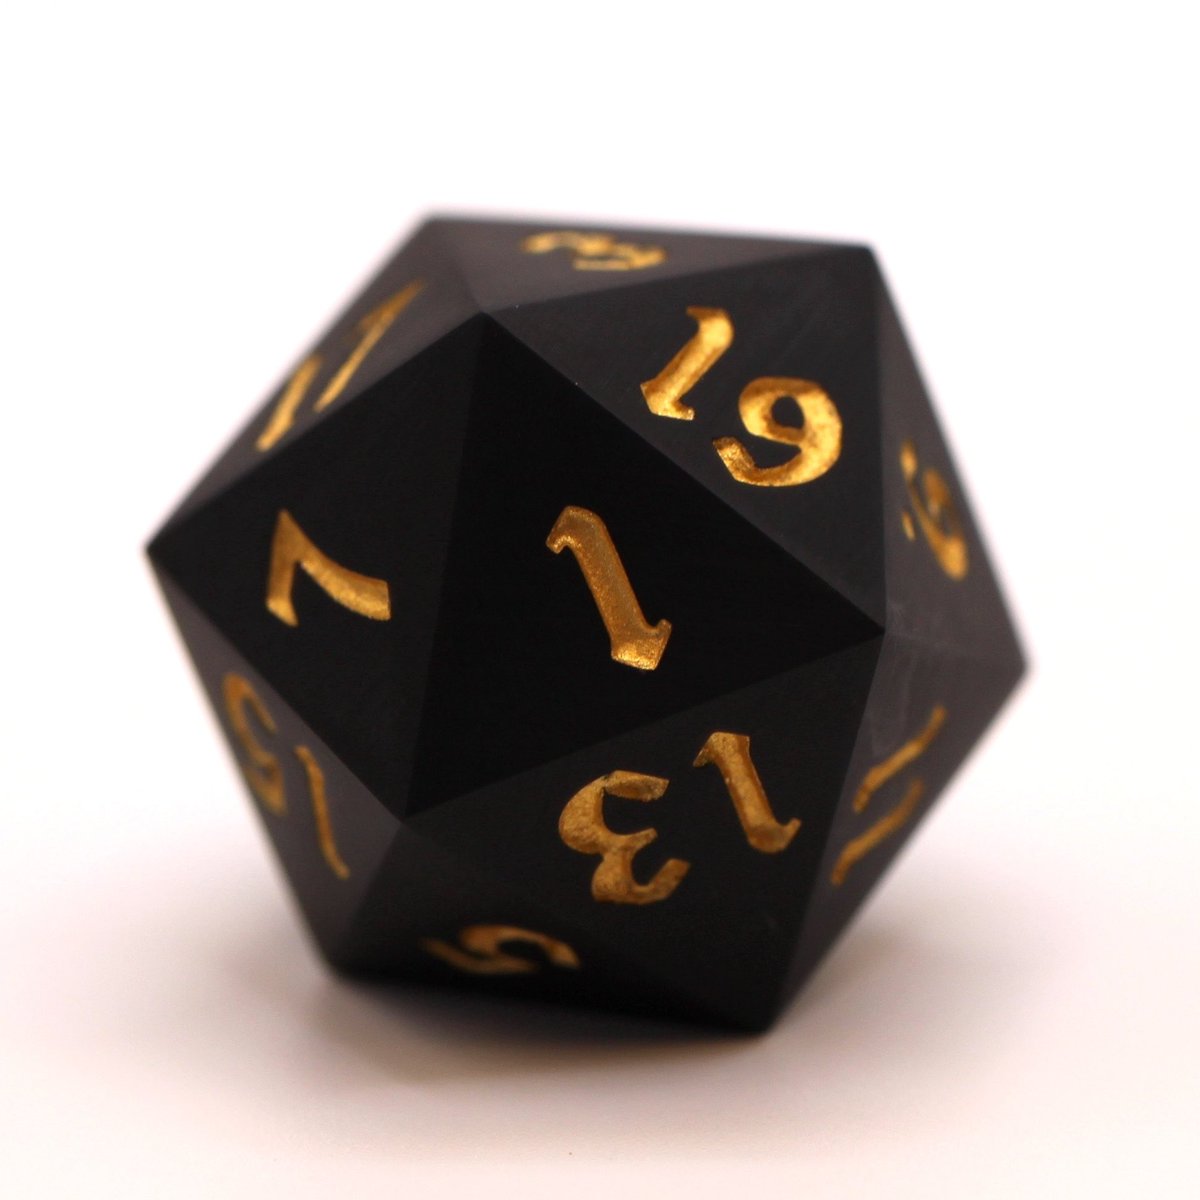 Some times simple is classic 👑 I’ve added some MATTE black and gold D20s and D10/D% pairs to my shop for fun. They’re a much more affordable price point compared to my usual work since they’re simple but striking! #blackandgold #dicemaking